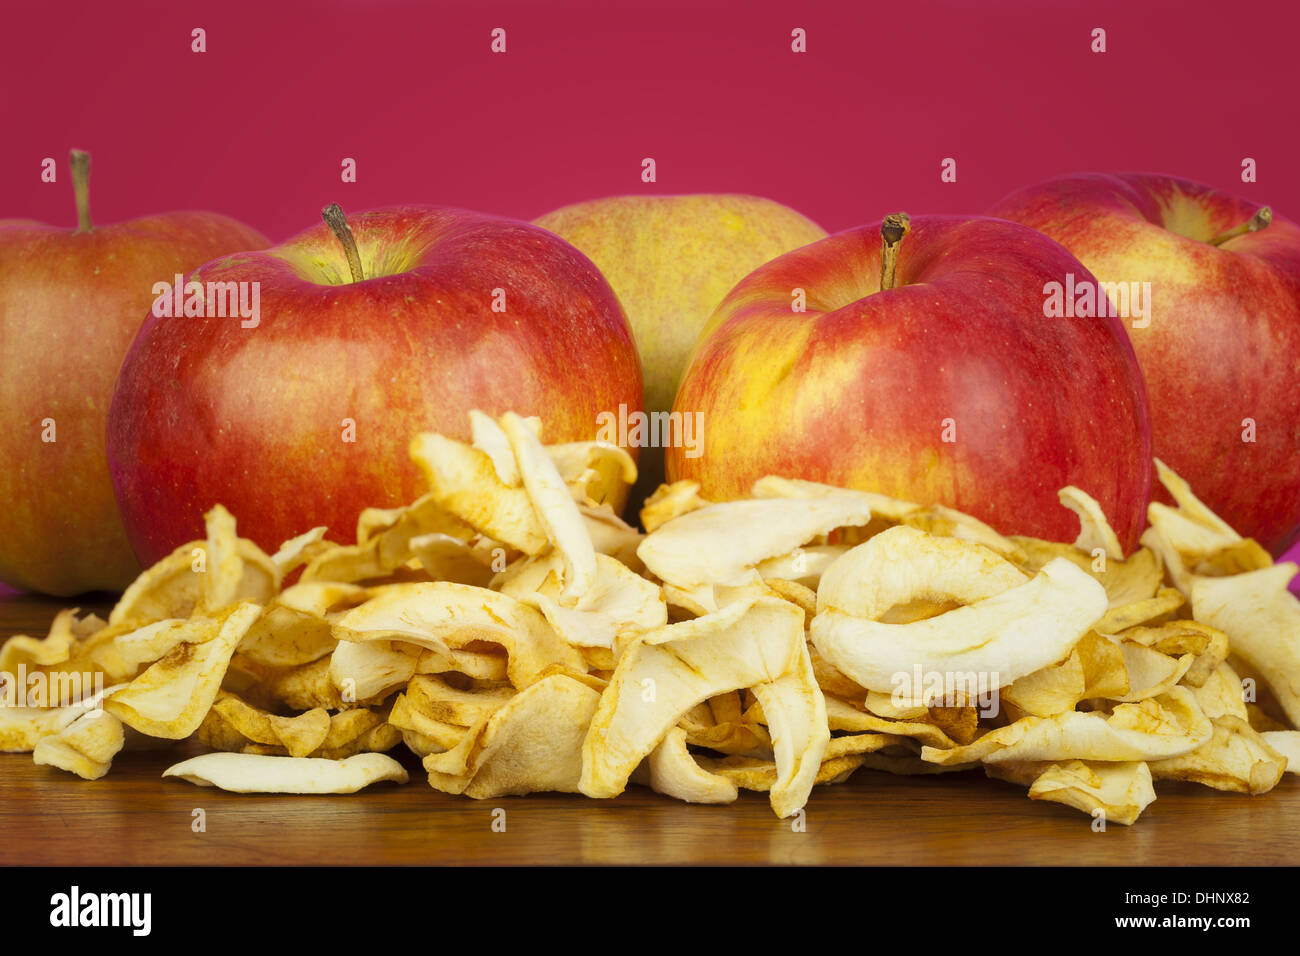 Dried apple slices on a table Stock Photo